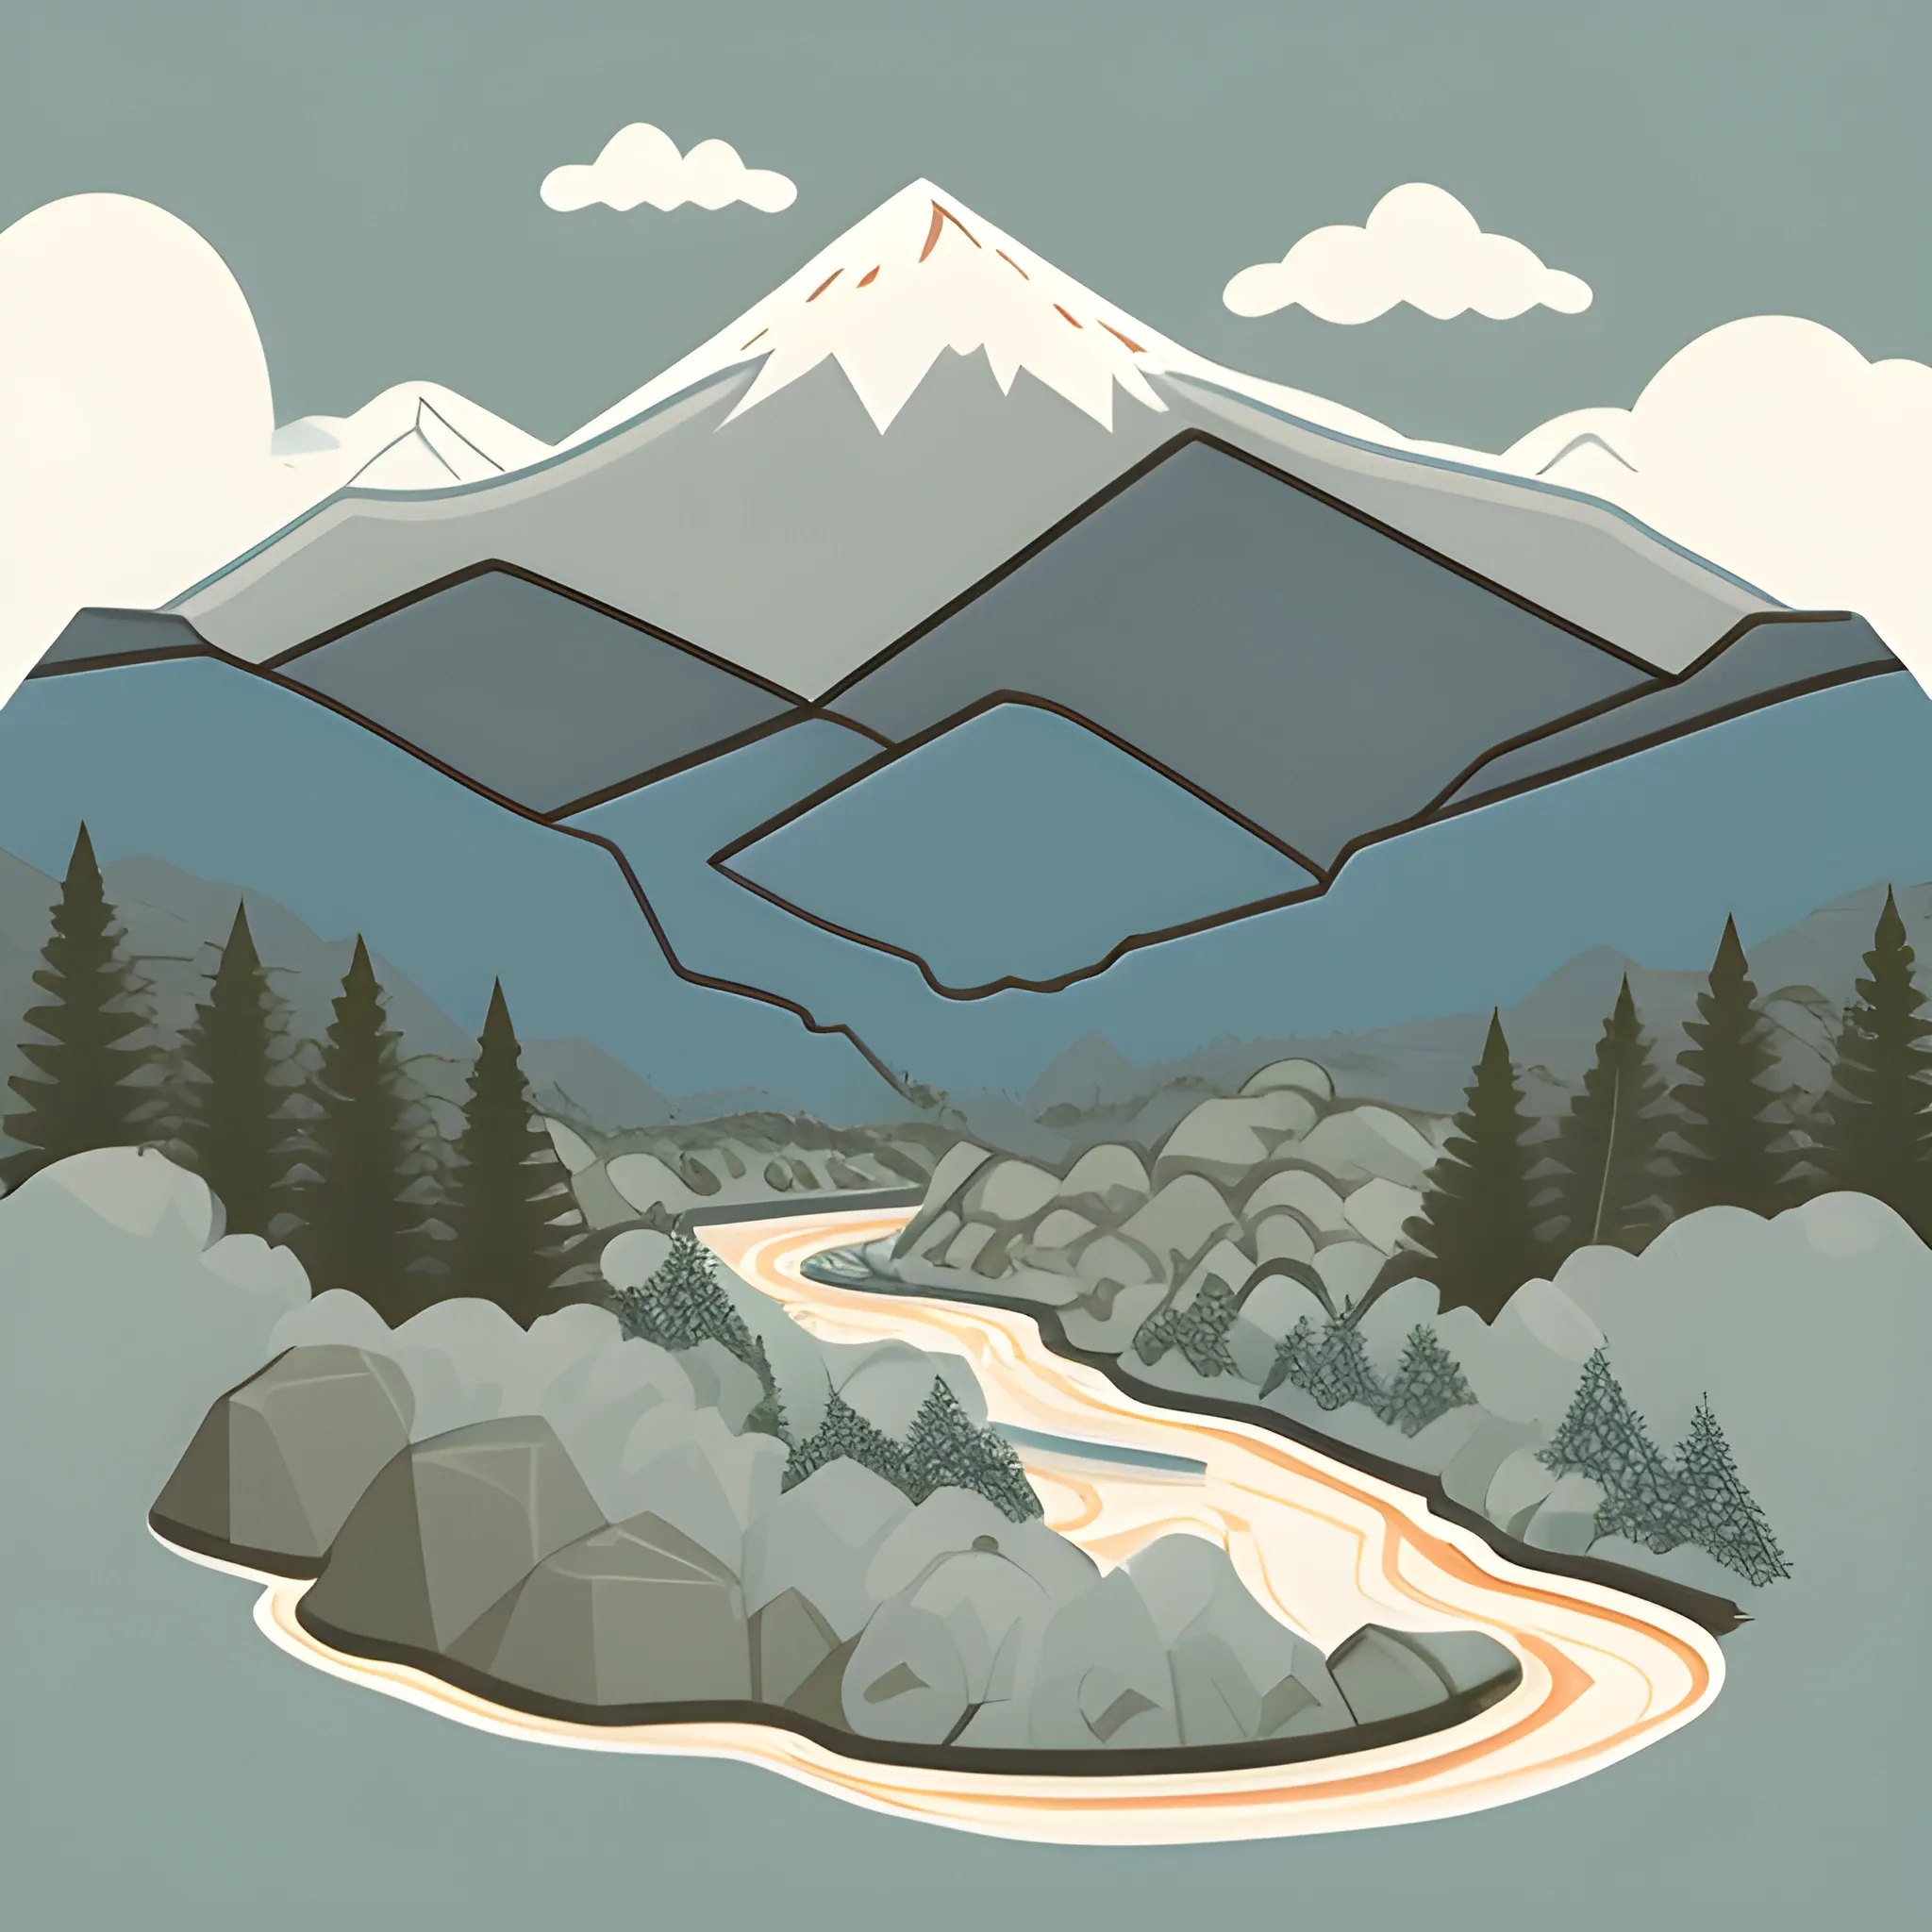 Create a stylized mountain landscape in a vector art style. Focus on a central scene with a river winding through the mountains. The background should feature varied peaks in shades of blue and gray. Line the riverbanks with clusters of evergreen trees. Include subtle cloud formations in the sky, maintaining a clear and serene atmosphere. Use a grainy texture to give the illustration a slightly rough, handcrafted feel. Stick to a color palette of blues, greens, and soft pastels.